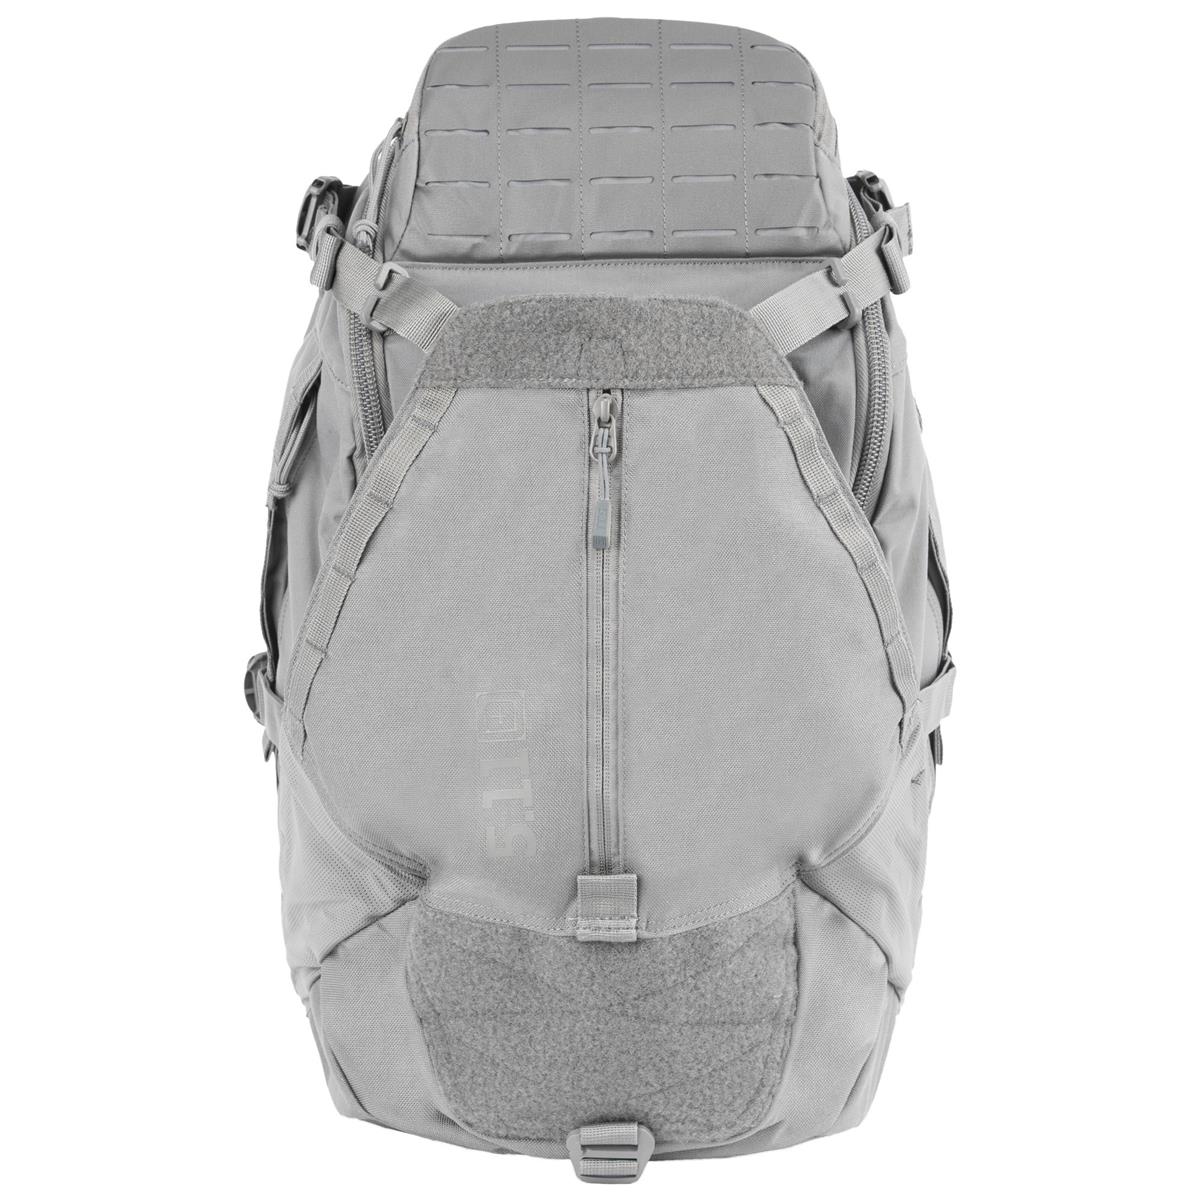 Image of 5.11 Tactical Havoc 30 Backpack with Hydration and Armor Plate Pocket